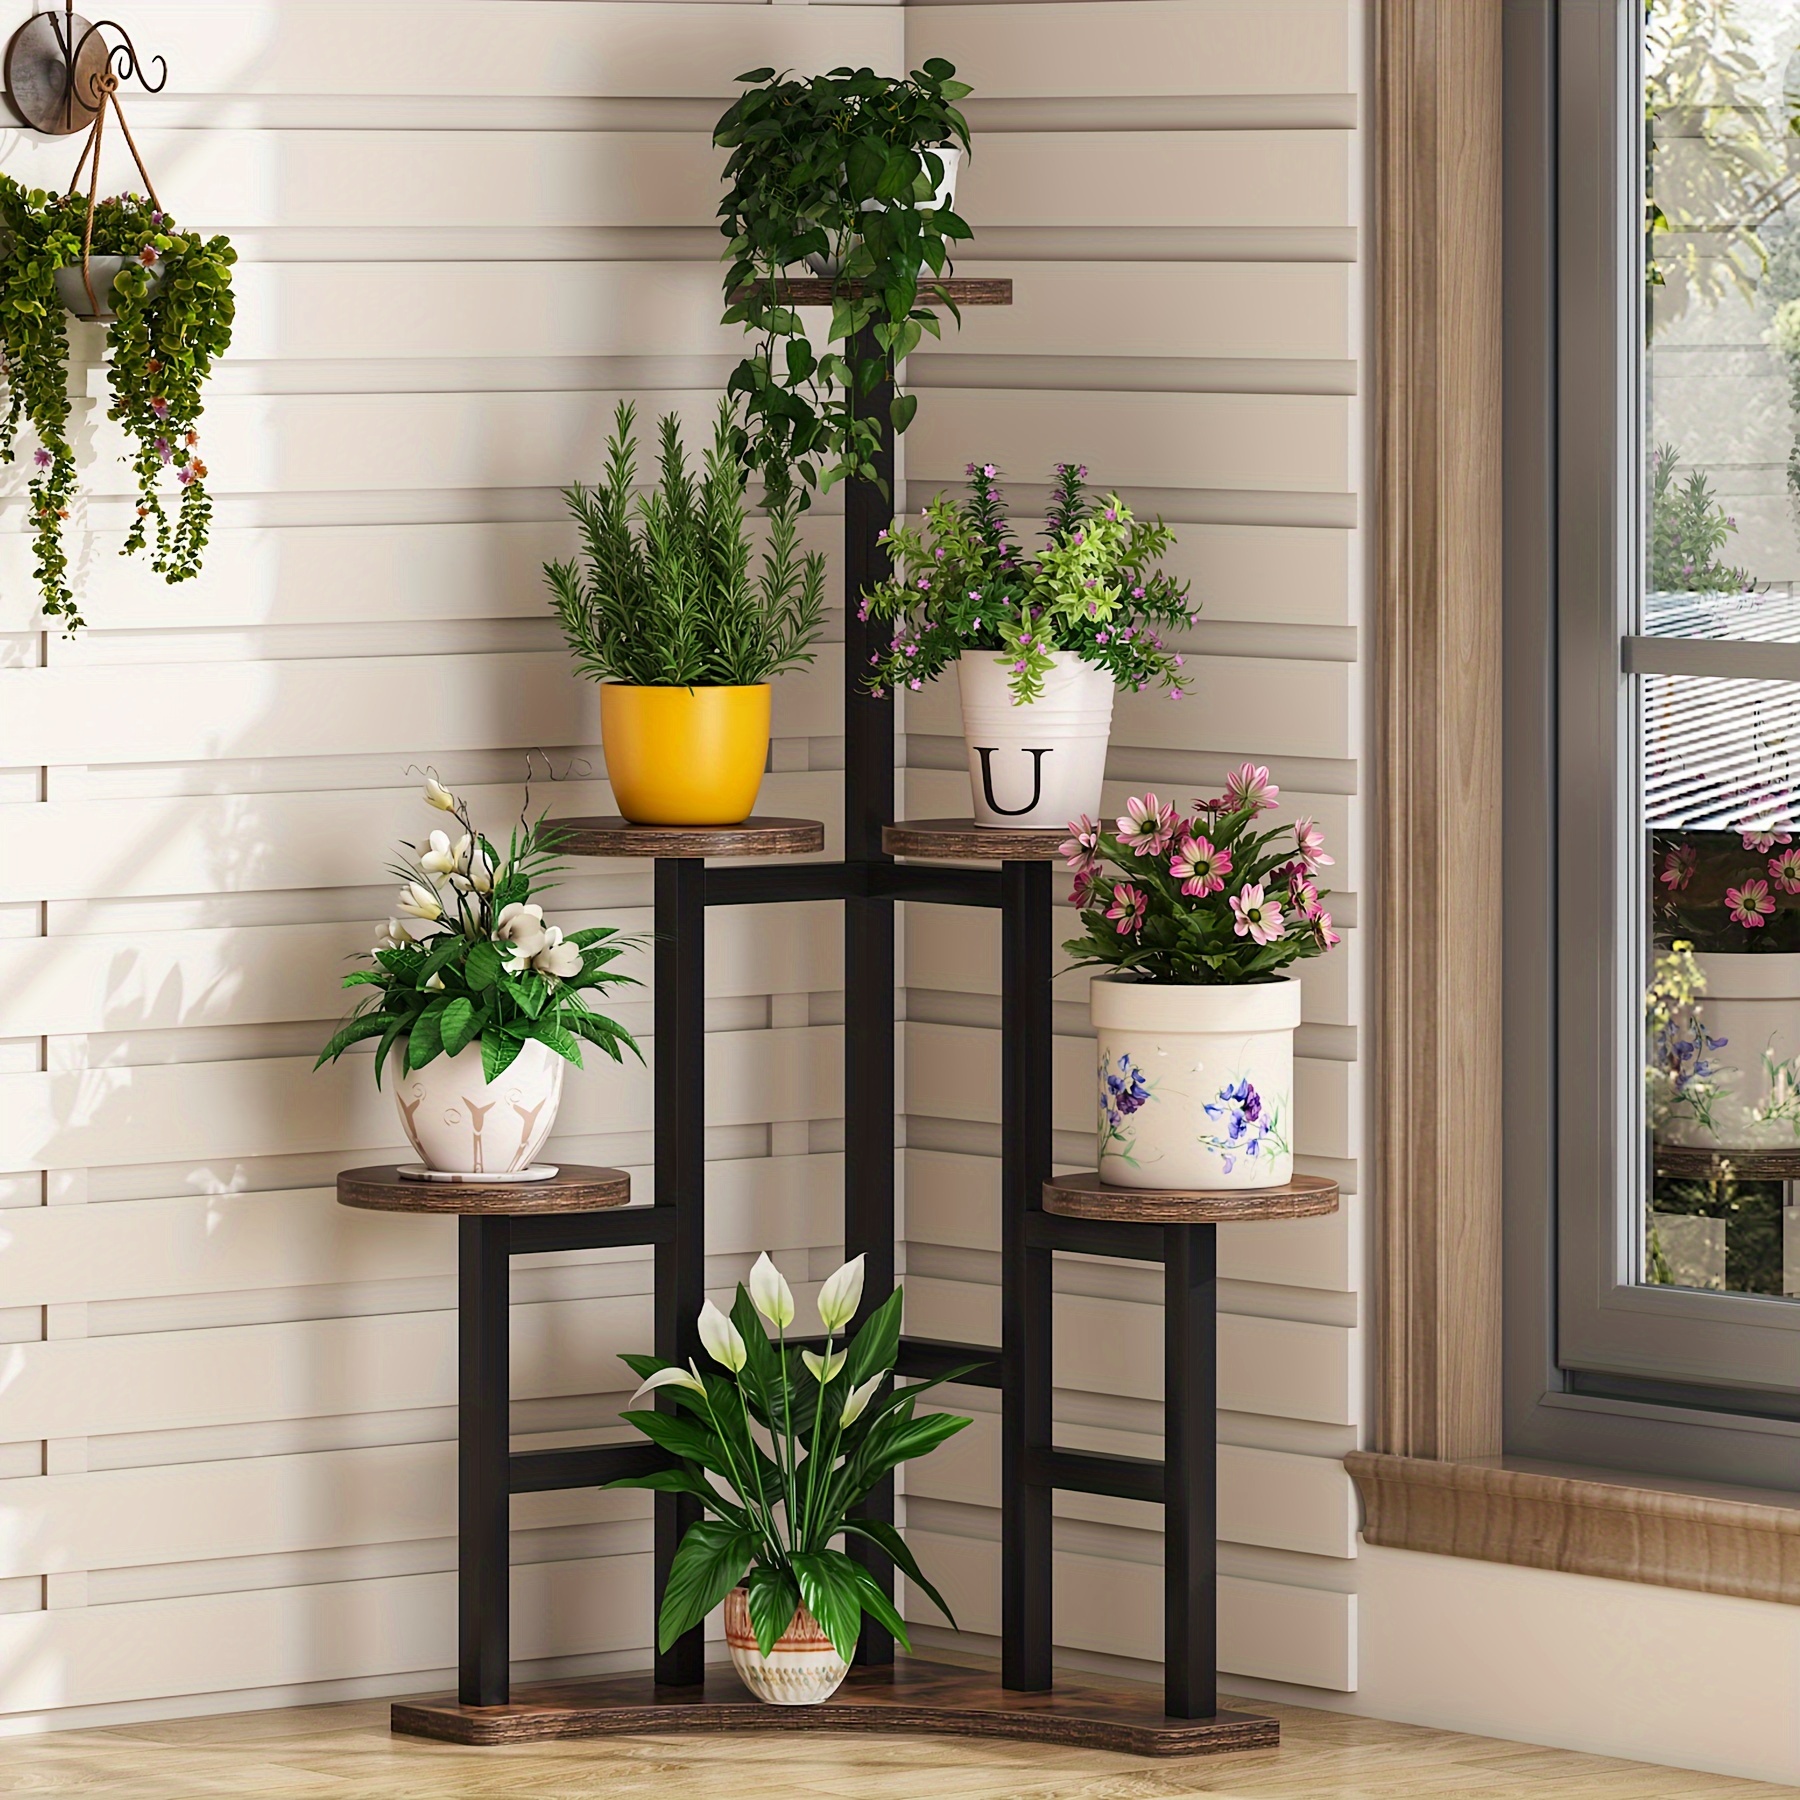 

Little Tree Corner Plant Stand Indoor, 6 Tiered Plant Shelf Flower Stand, Tall Multiple Potted Plant Holder Rack Planter Organizer For Living Room Balcony Garden, Rustic Brown